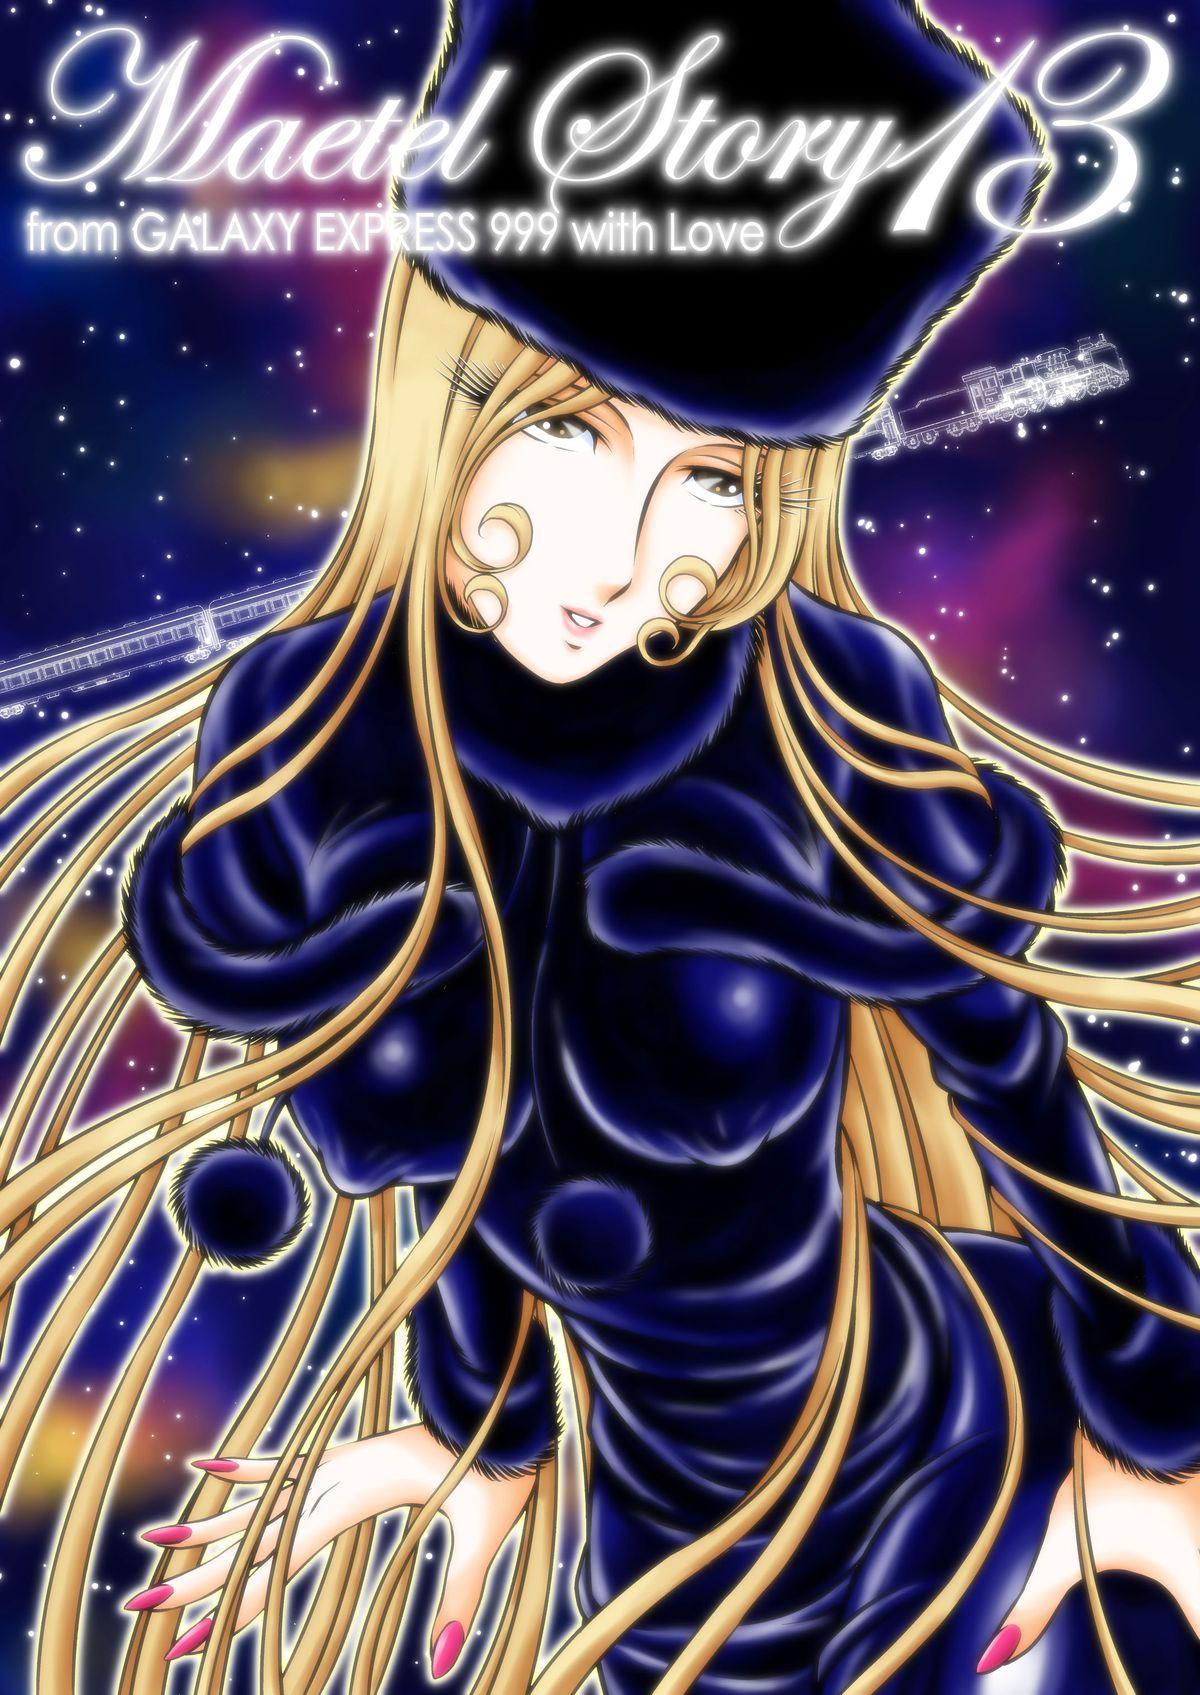 Hot Cunt Maetel Story 13 - Galaxy express 999 Viet Nam - Picture 1